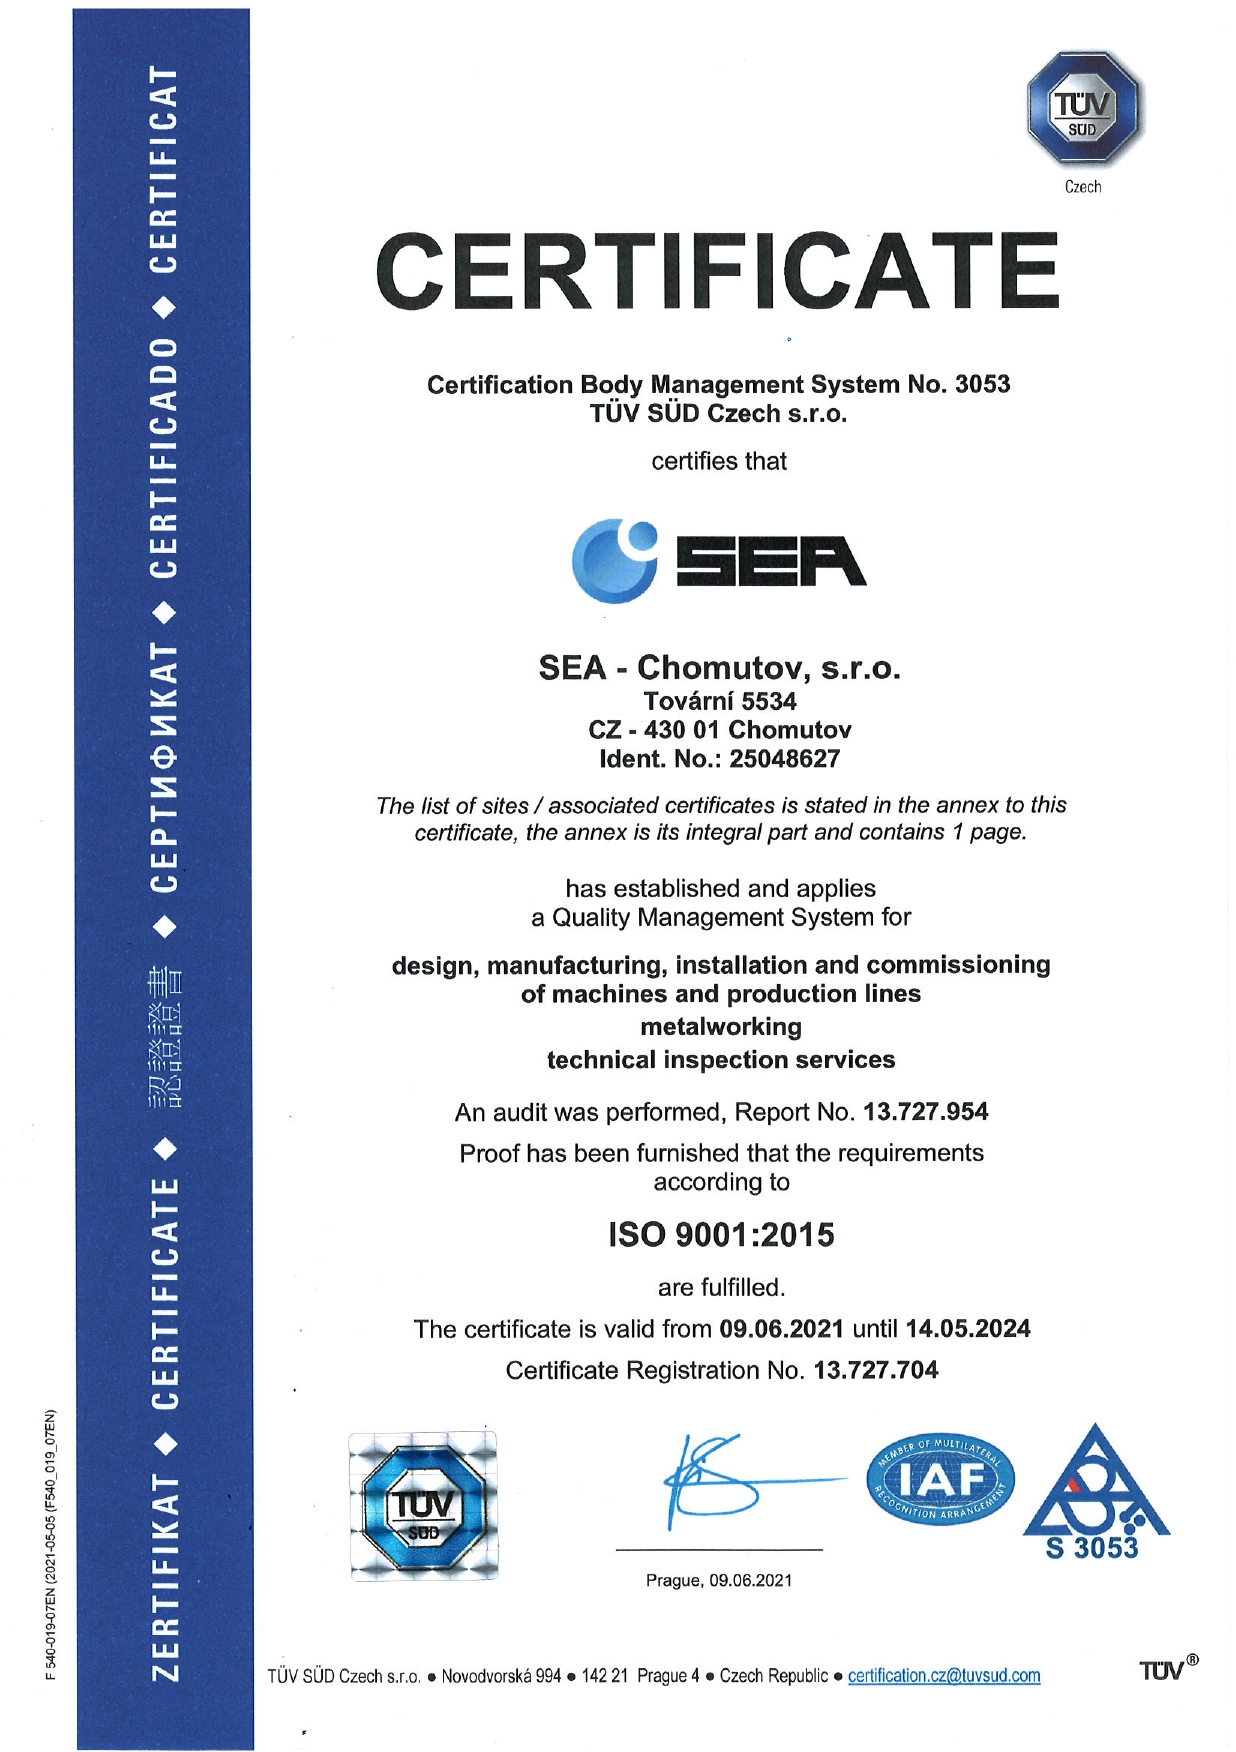 Certificate of quality management system according to ČSN EN ISO 9001:2015